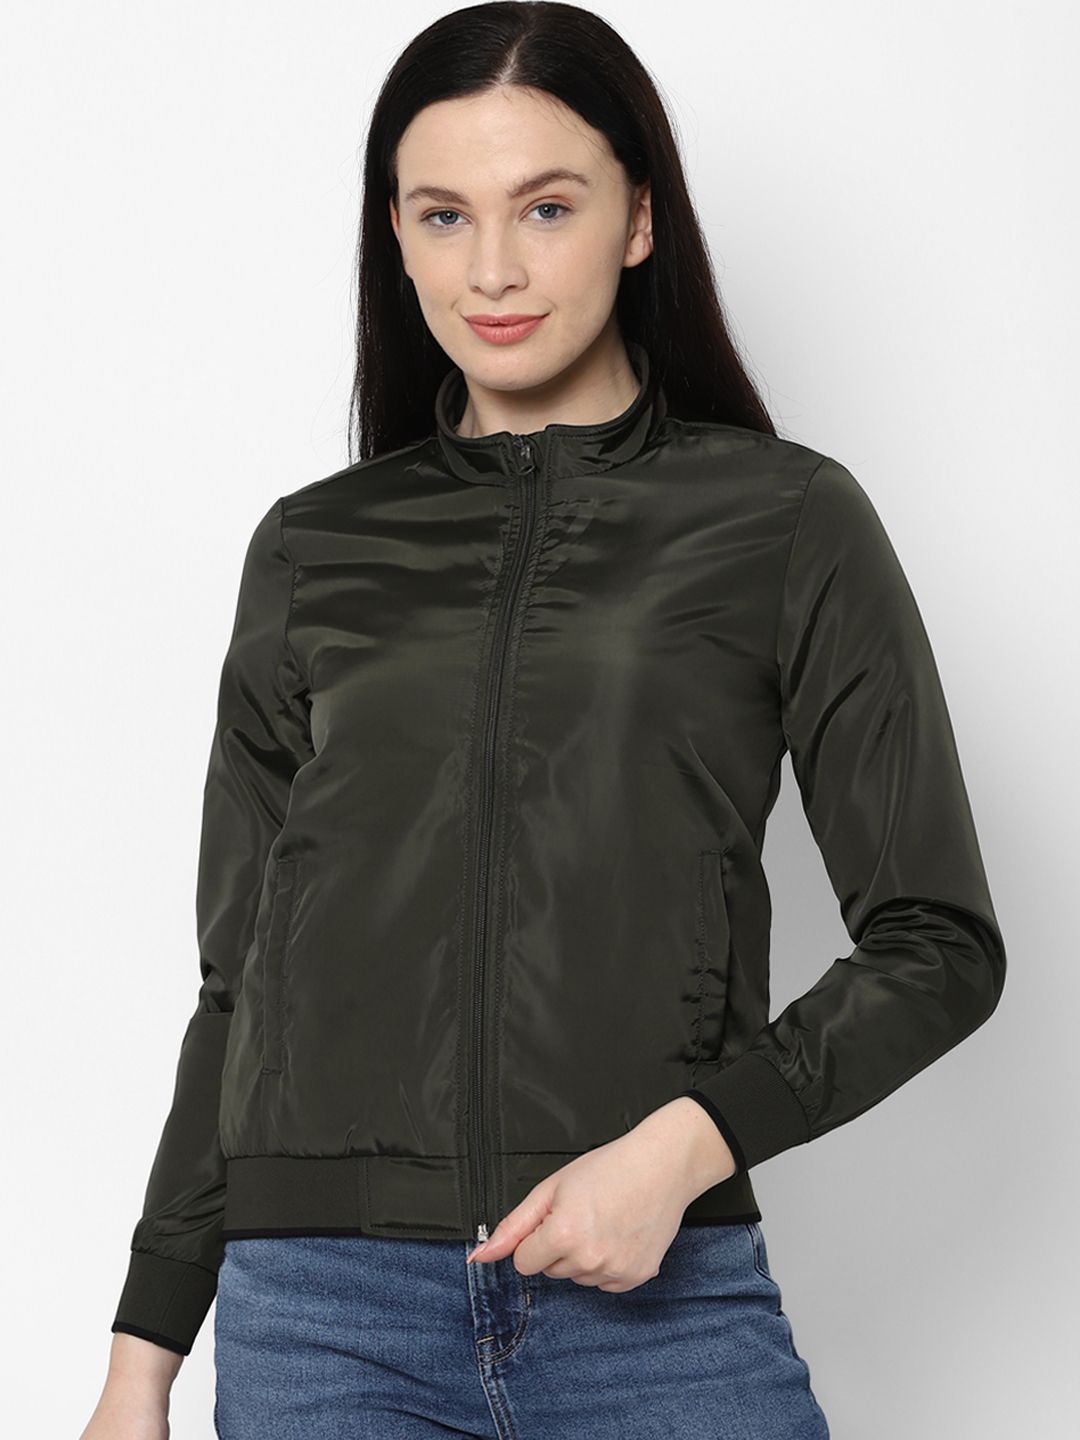 Allen Solly Woman Women Olive Green Bomber Jacket Price in India